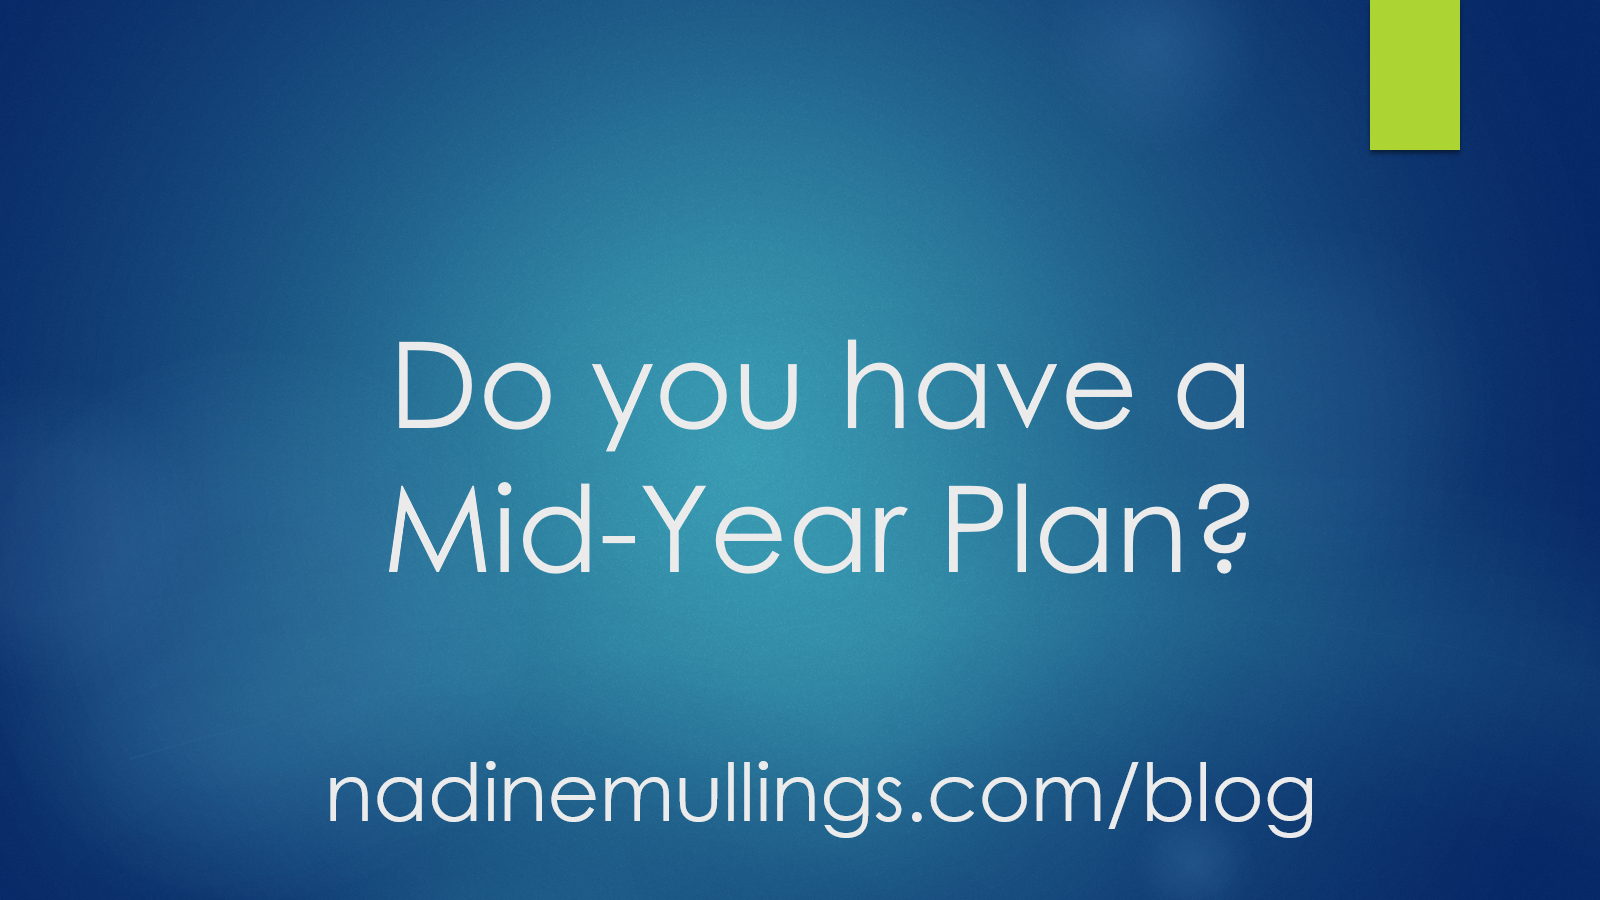 Do you have a mid-year plan